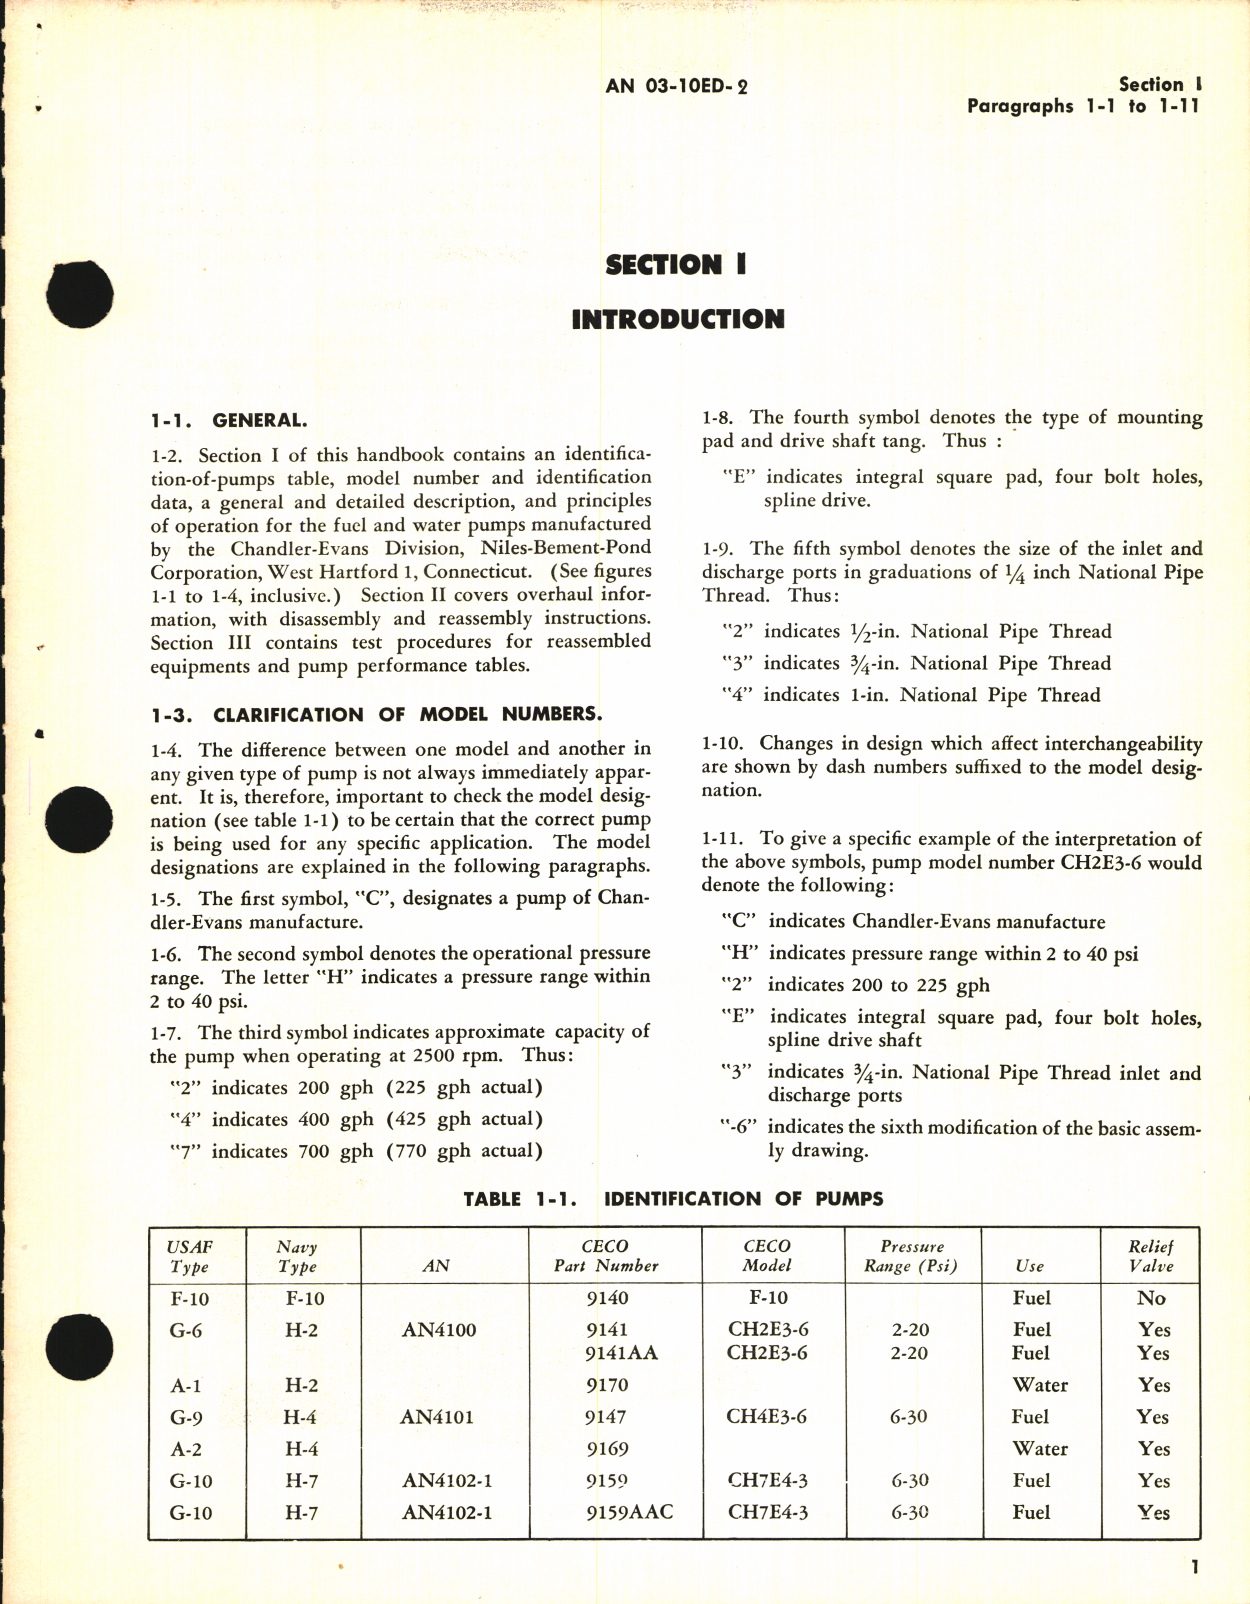 Sample page 5 from AirCorps Library document: Overhaul Instructions for Fuel and Water Pumps